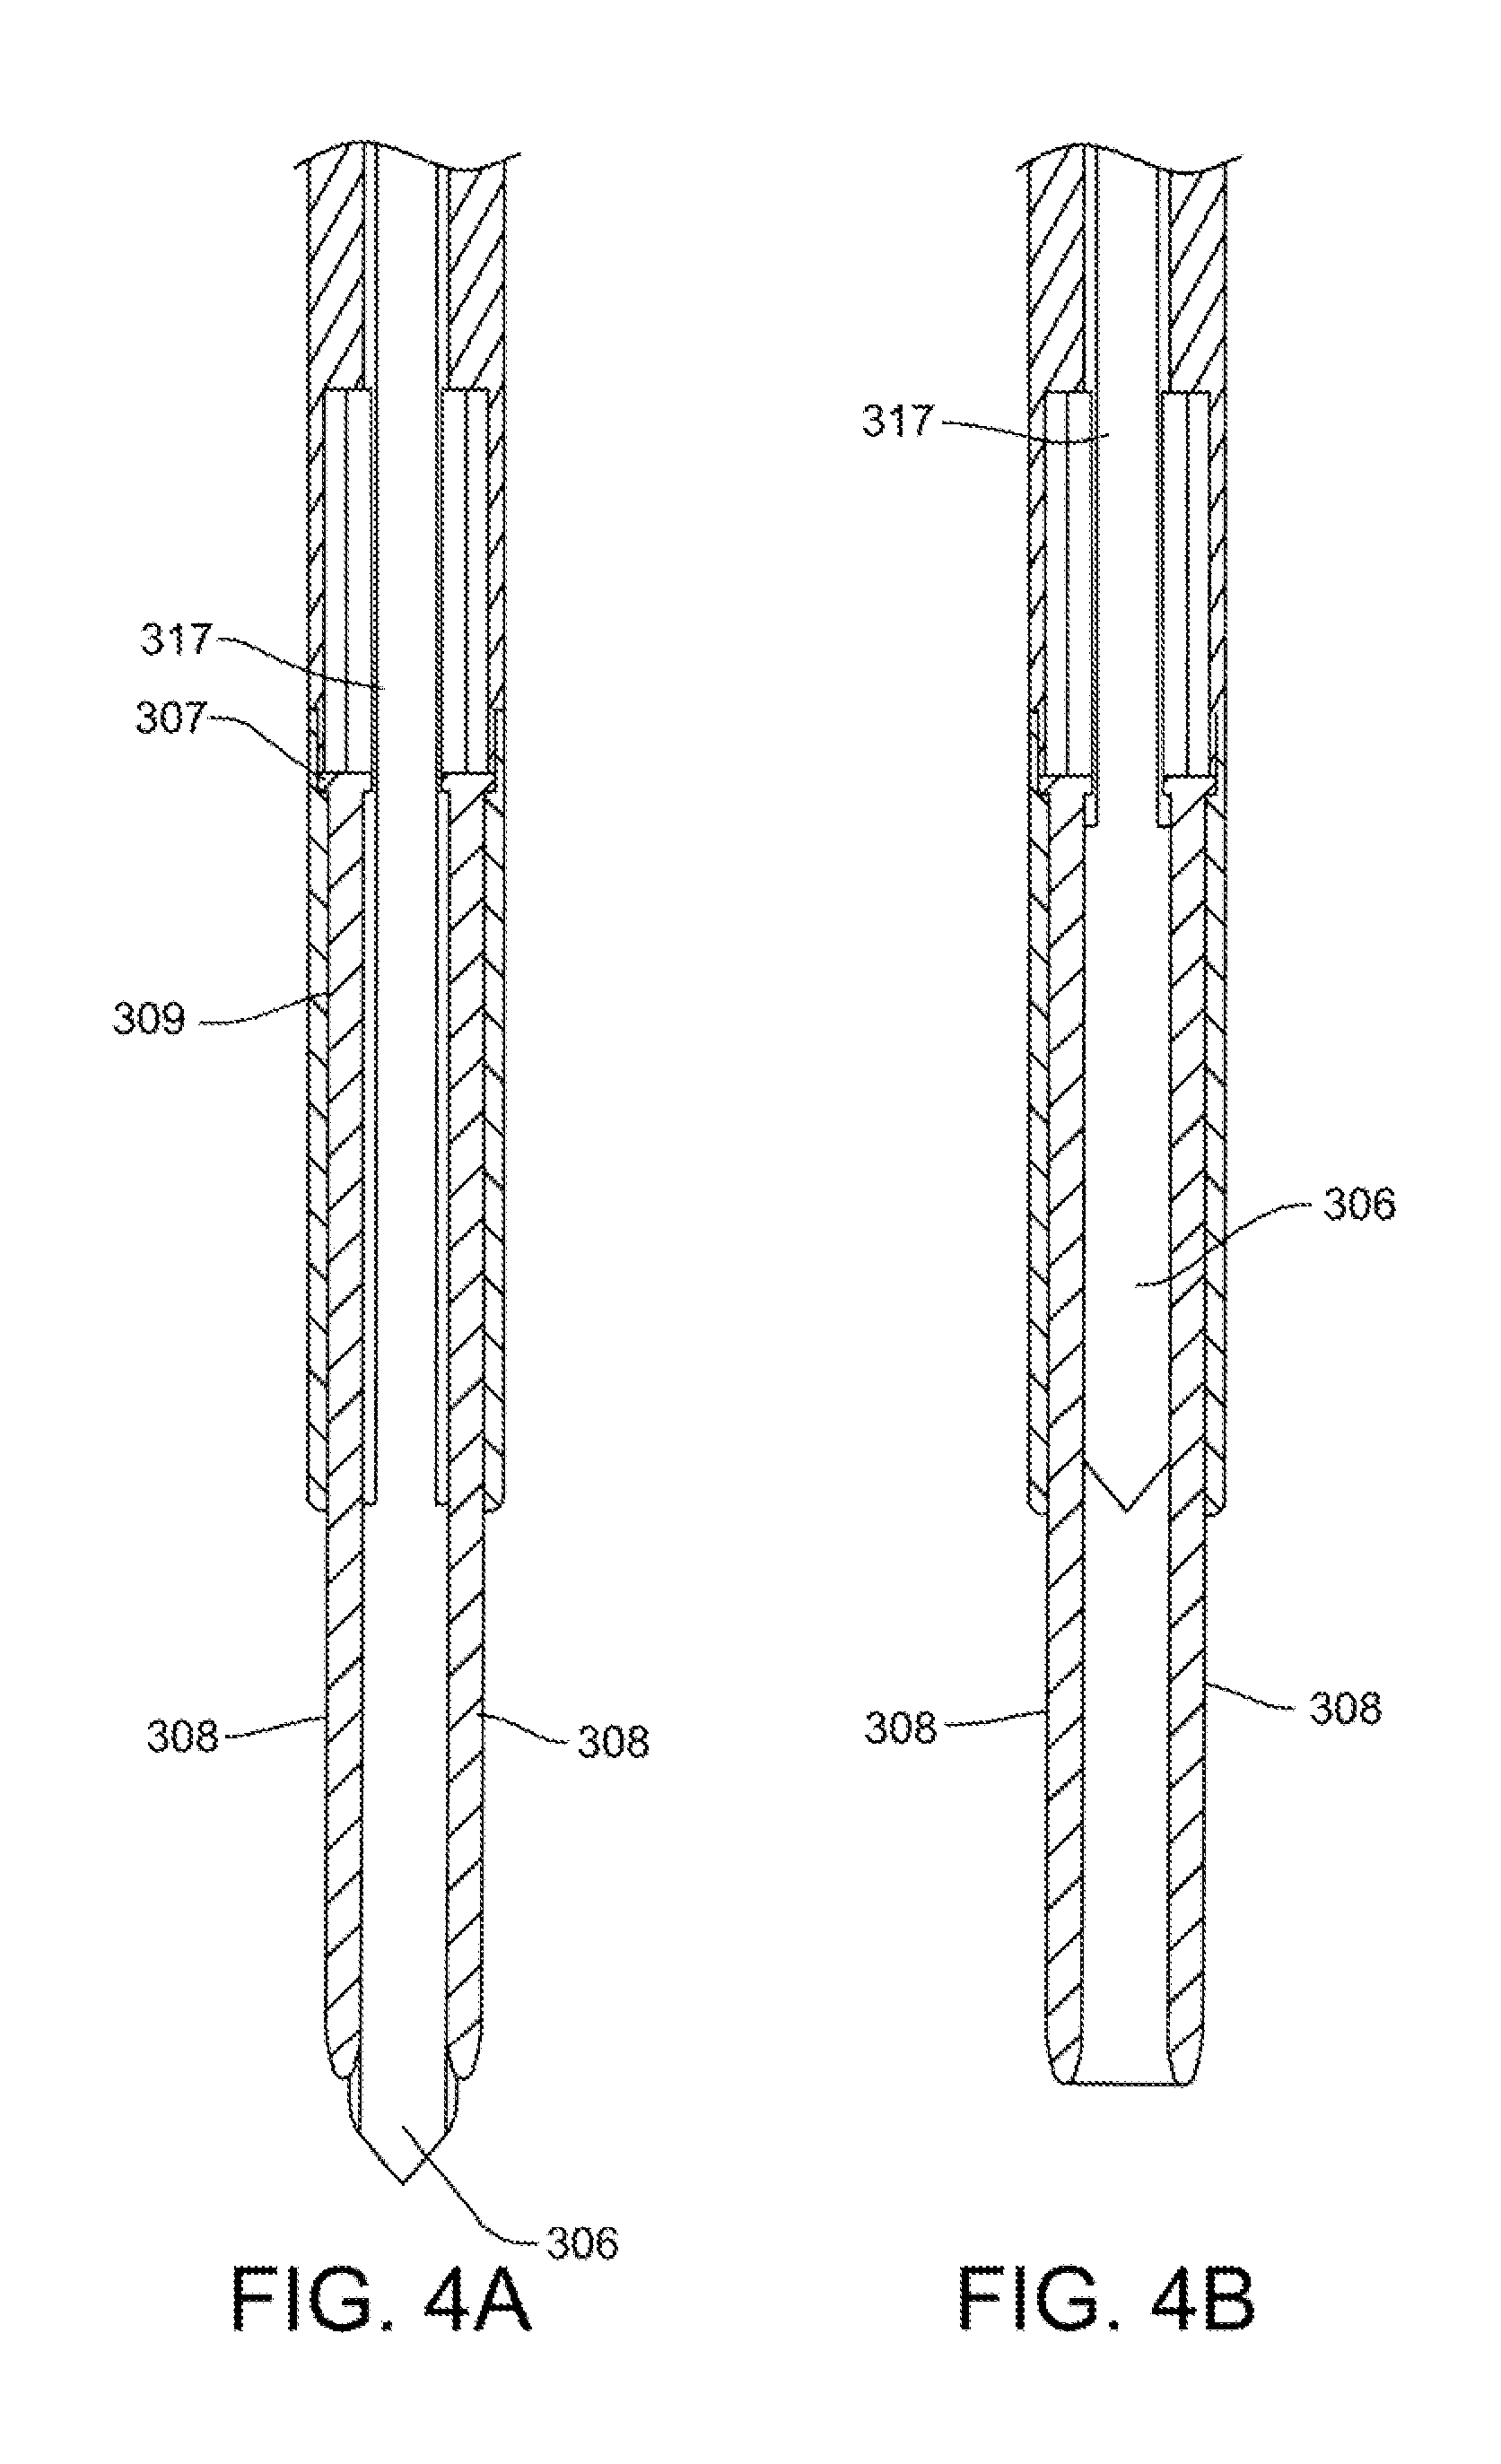 Apparatus and method for forming pilot holes in bone and delivering fasteners therein for retaining an implant